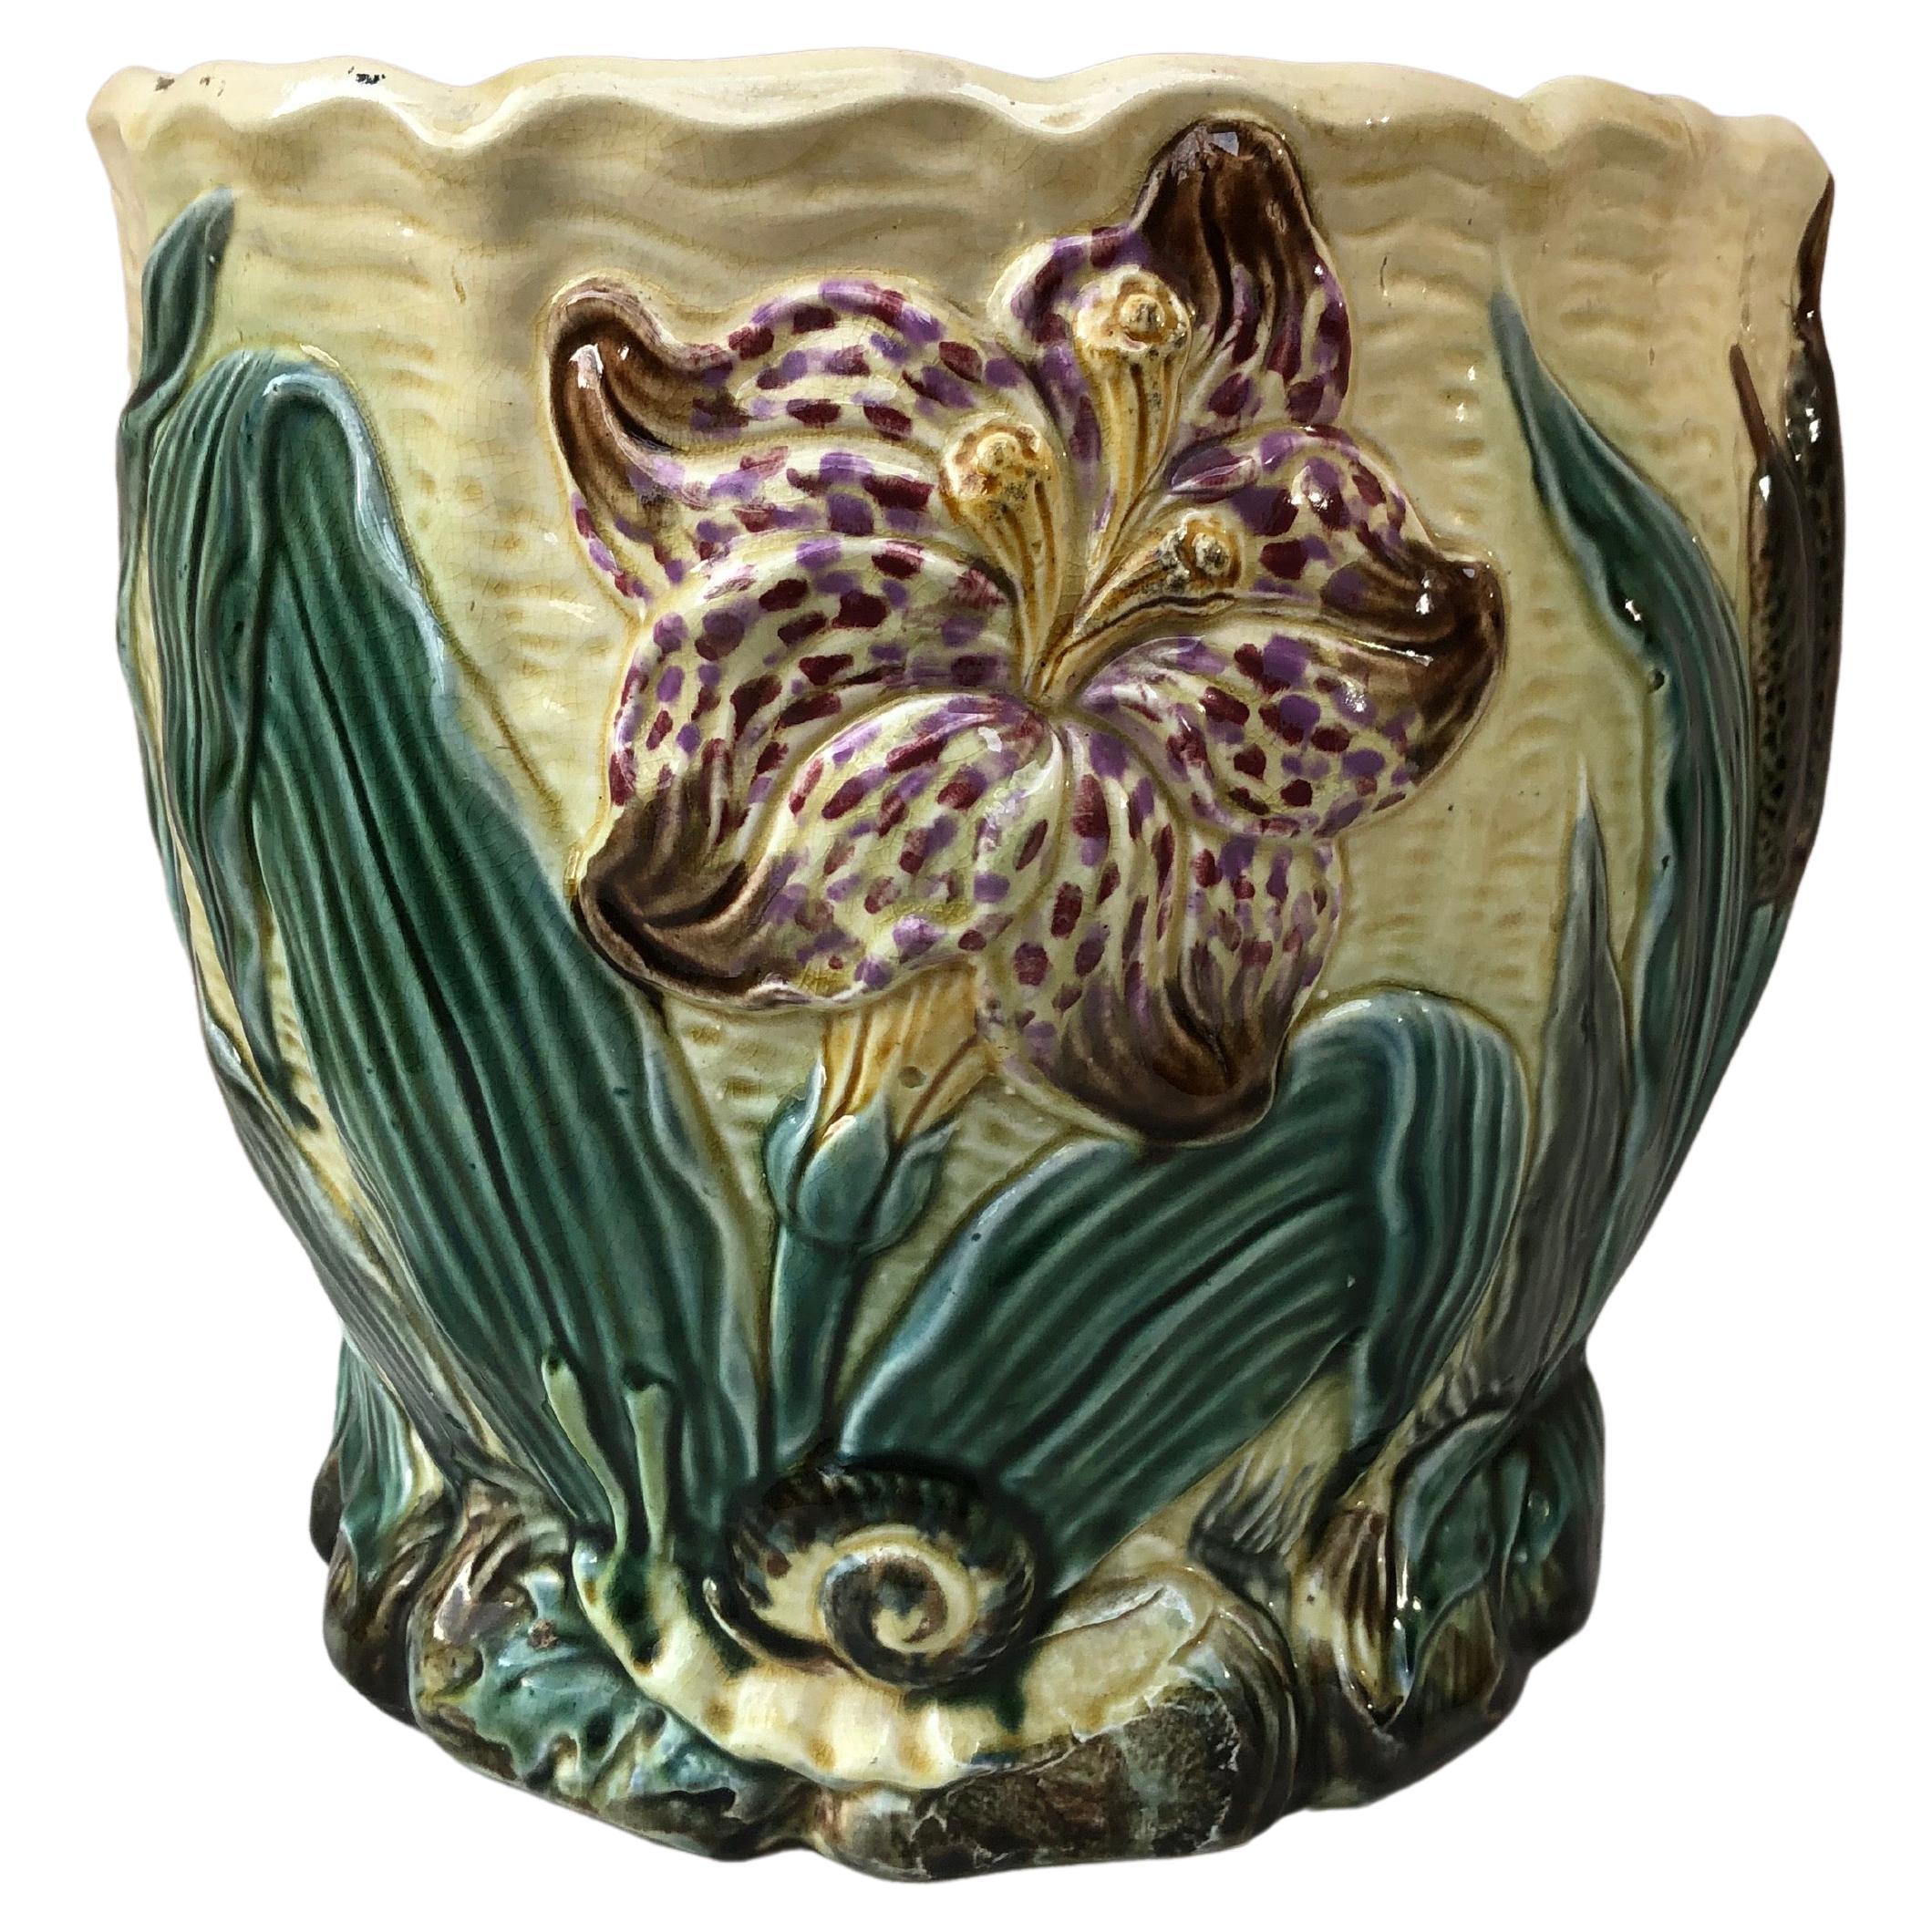 What is a majolica jardiniere?